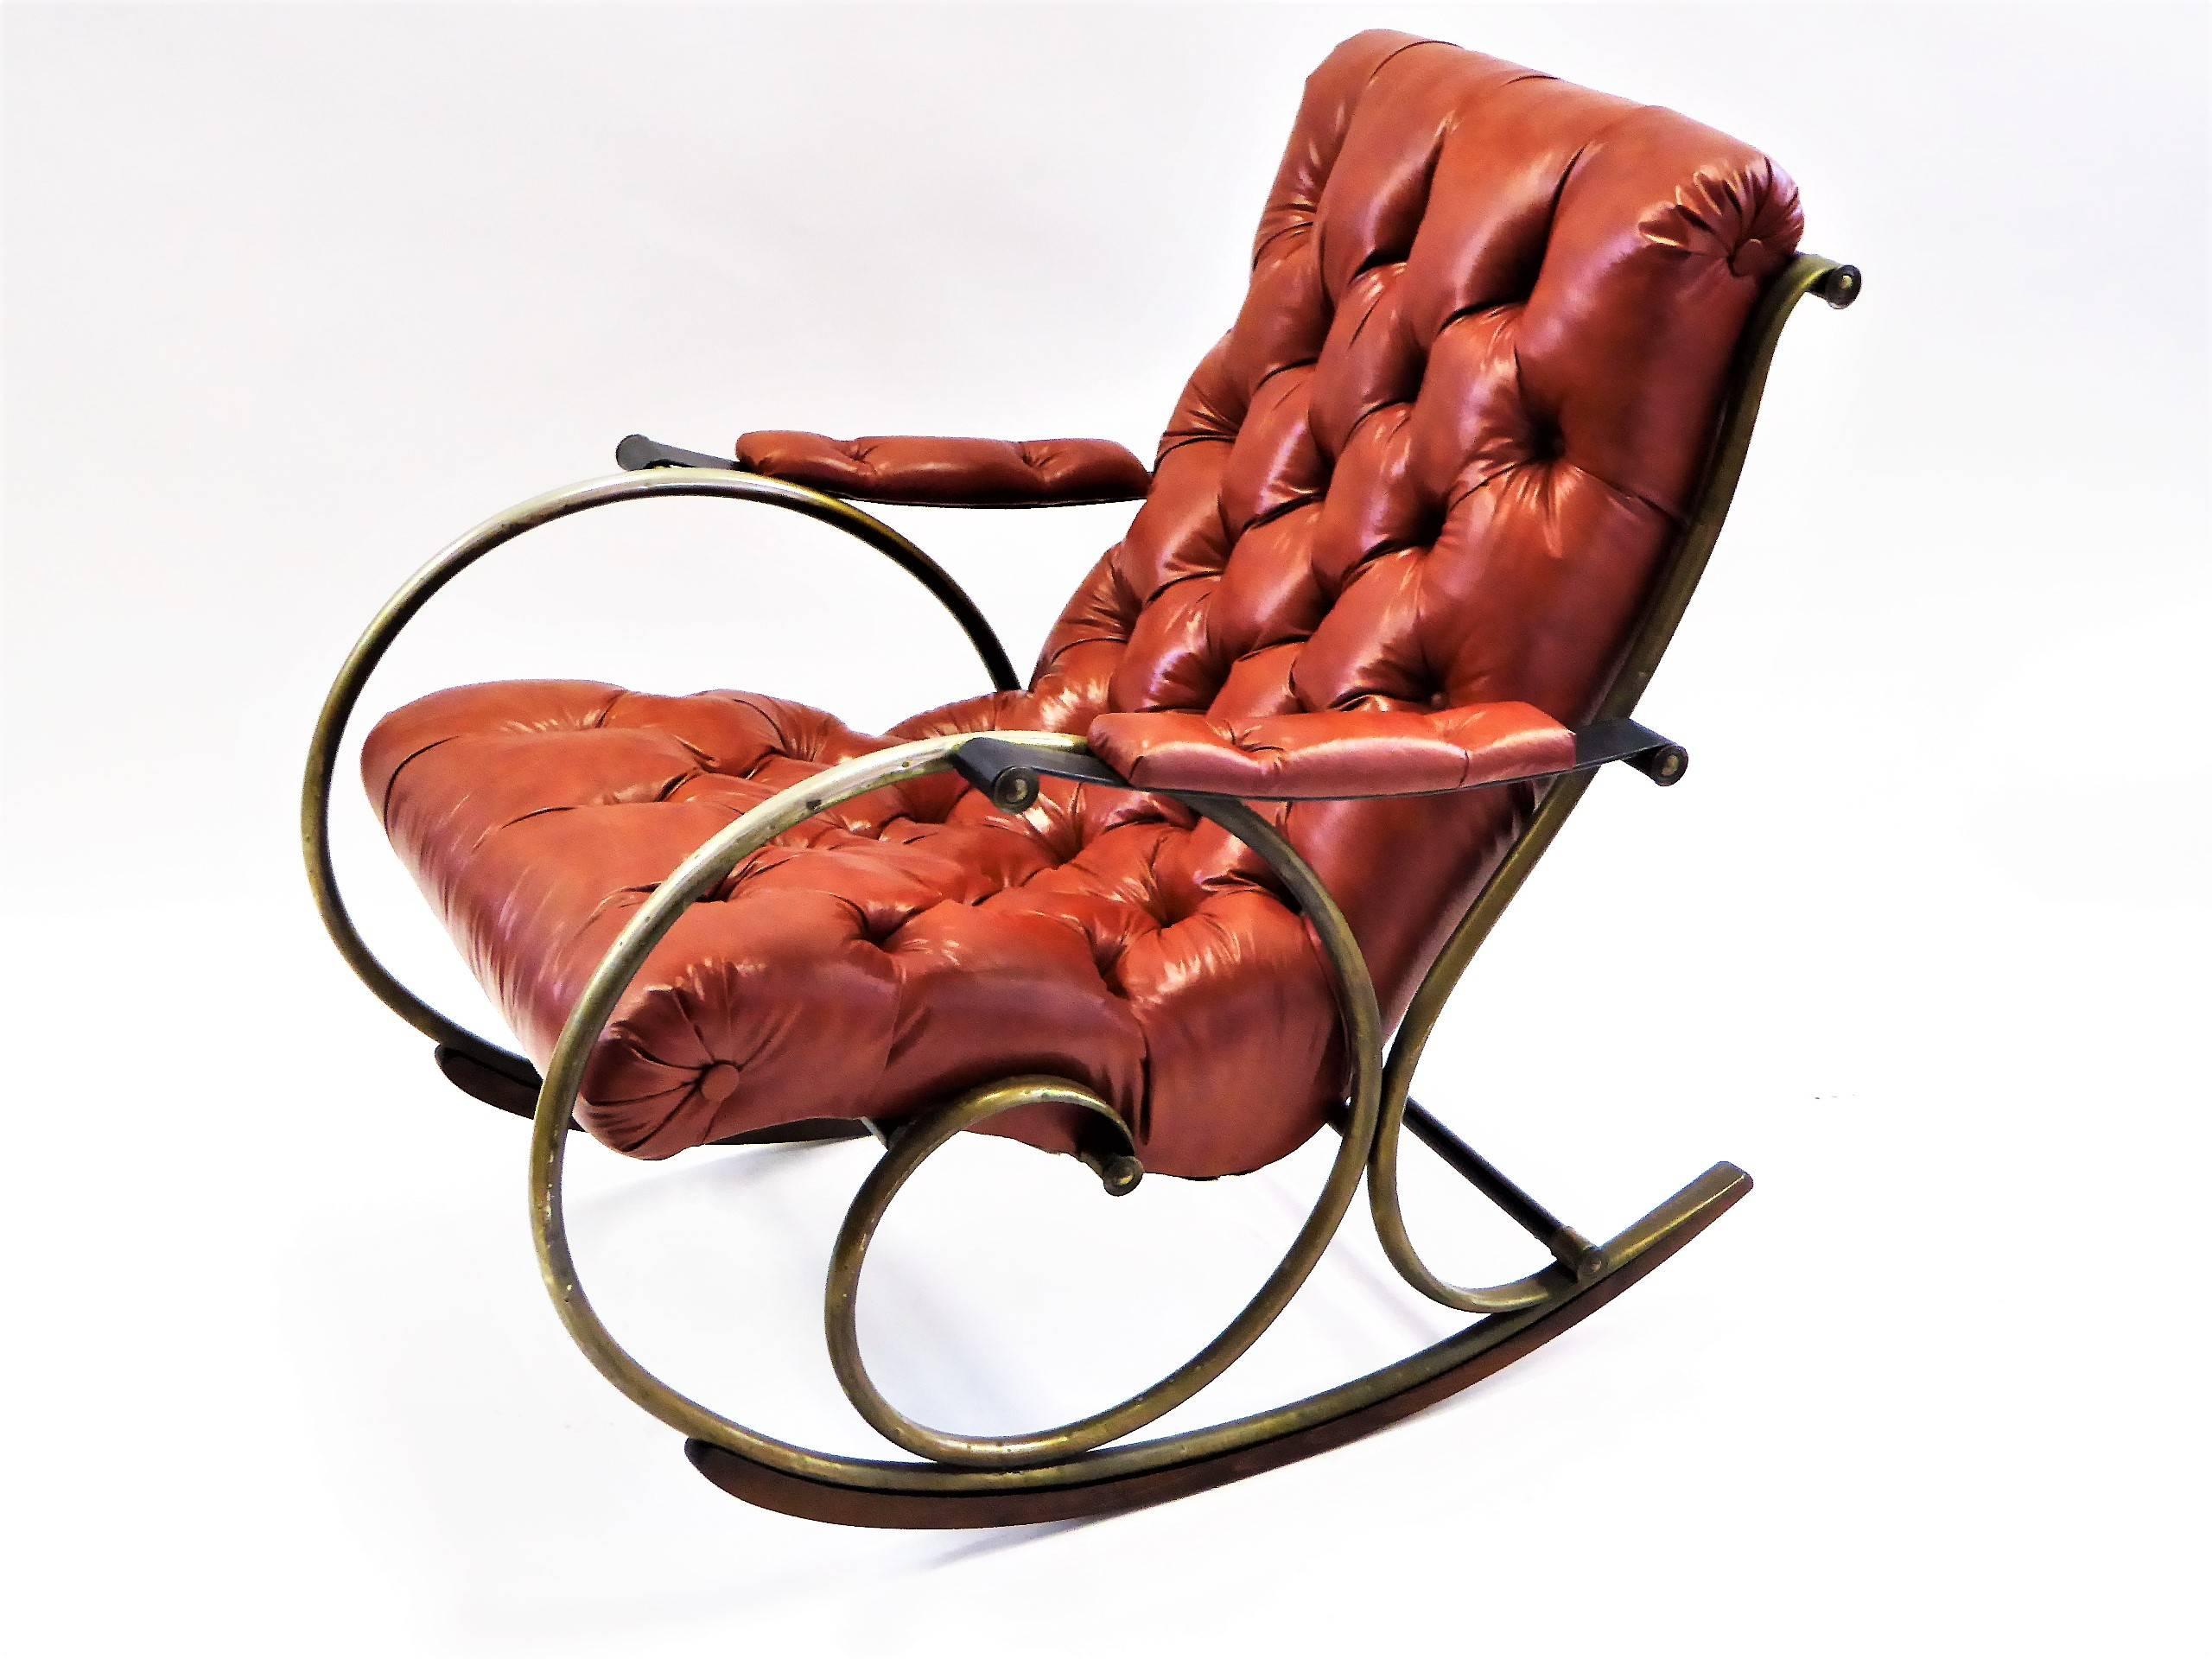 REDUCED FROM $1,500.
With a Mid-Century styling inspired by turn of the century Edwardian tastes, this Lee L. Woodard designed rocking chair is most comfortable and the tufted leatherette upholstery divine. With a antiqued brass finish over nickel